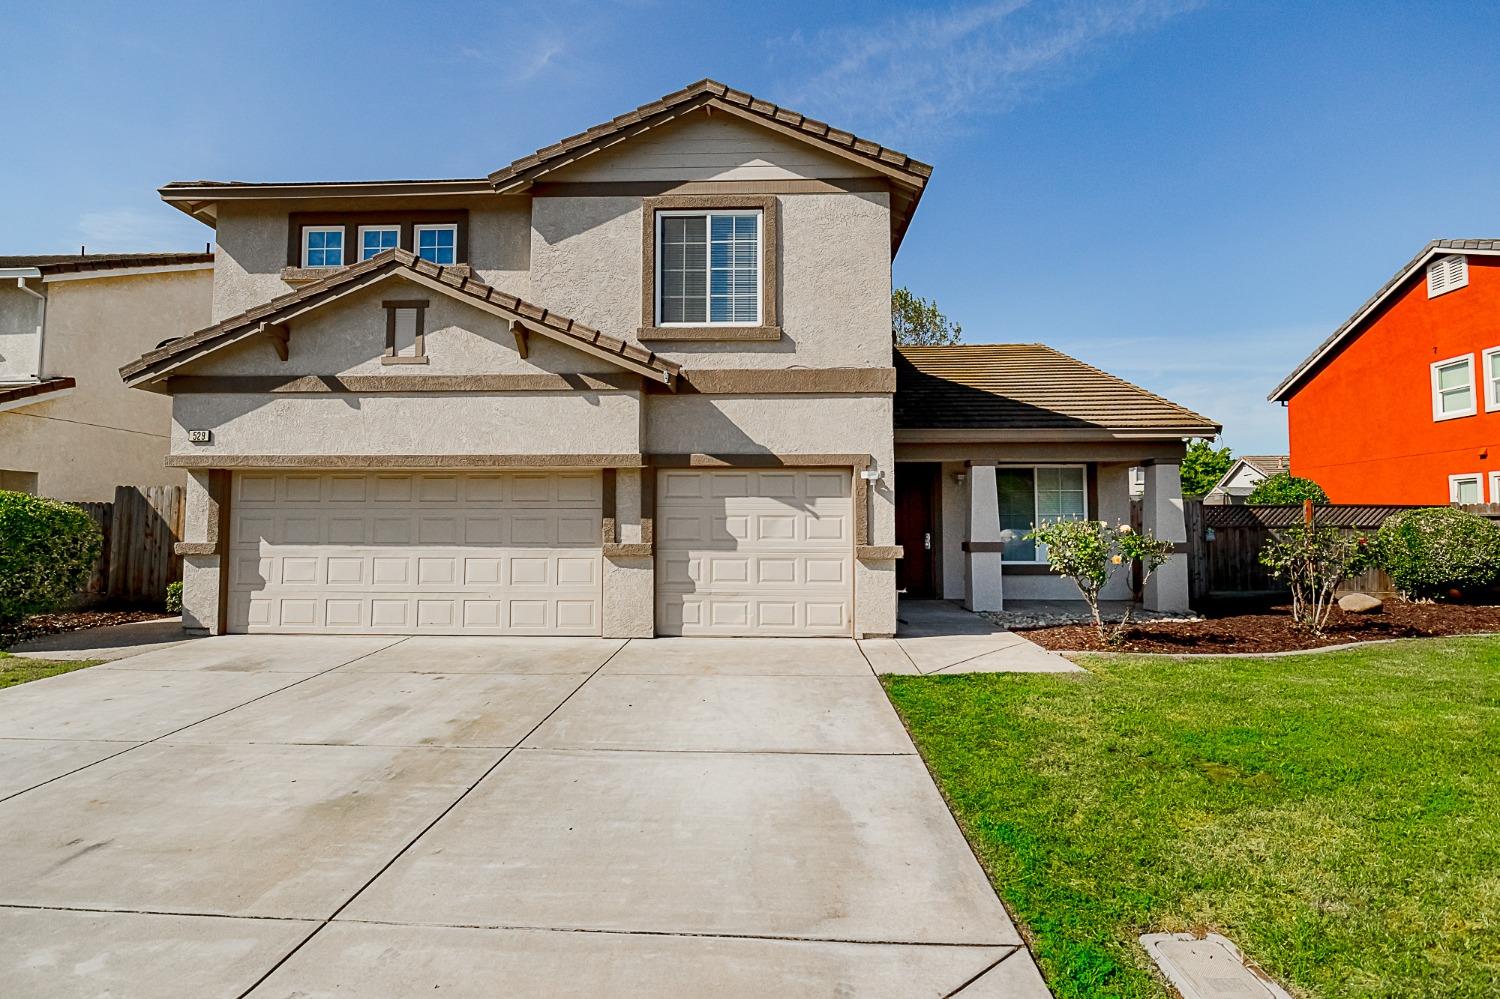 Photo of 529 Micheletos Wy in Manteca, CA